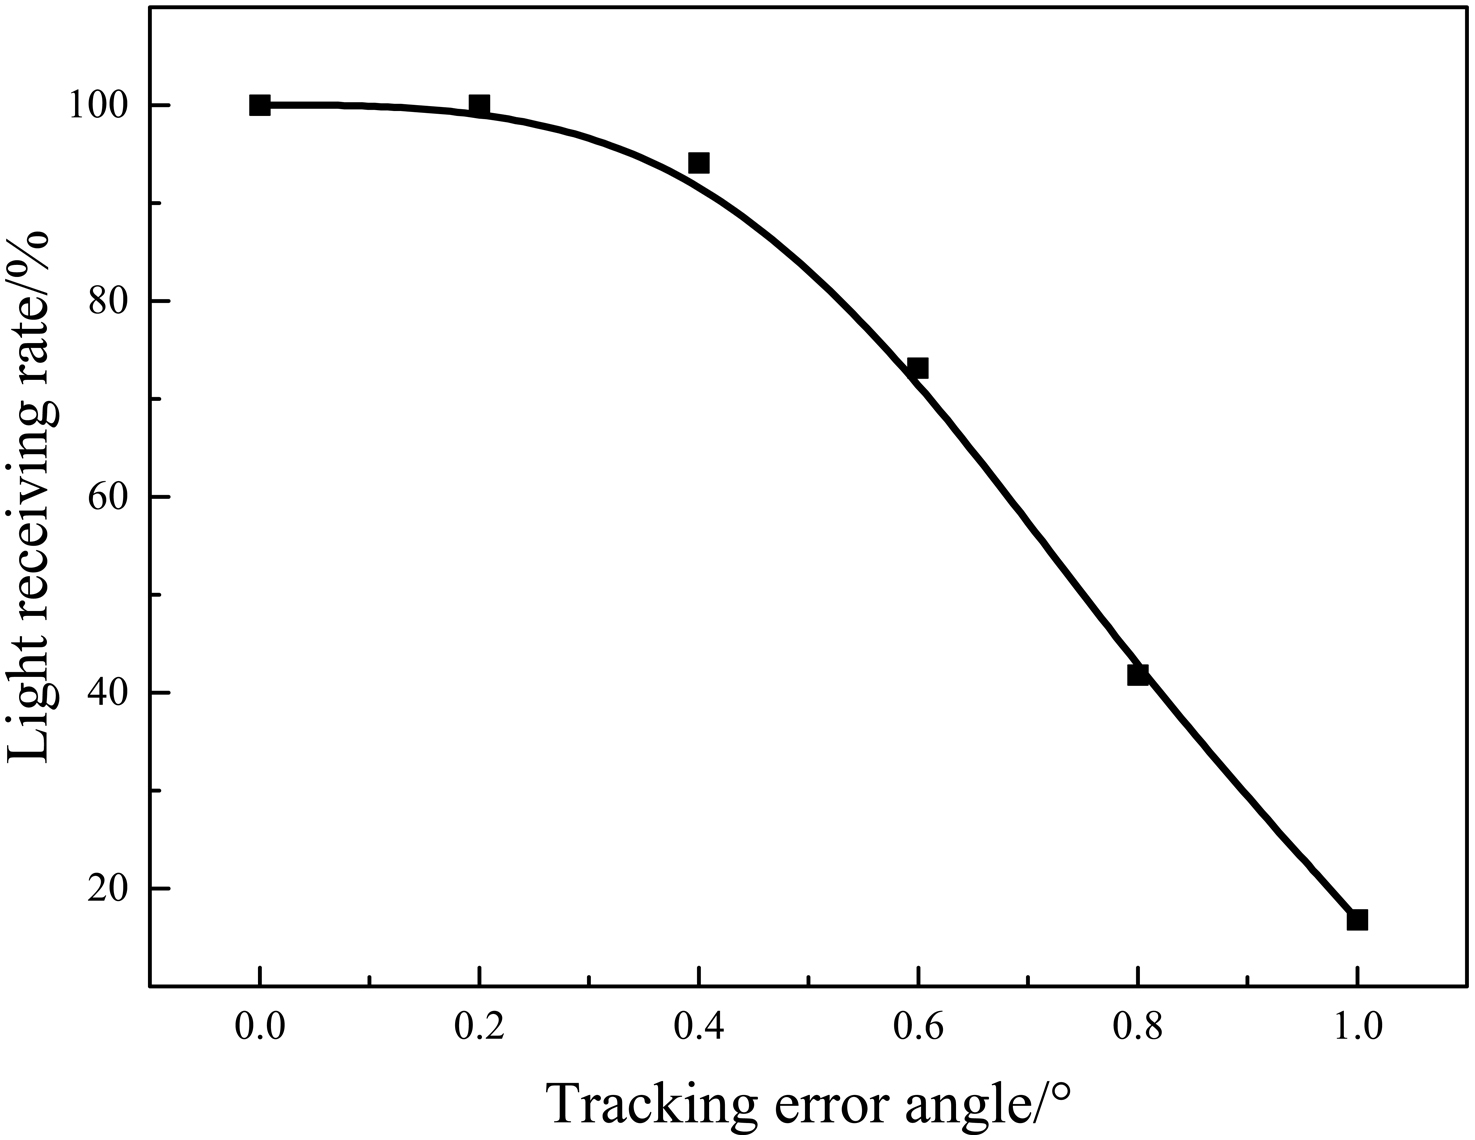 Variation of the light receiving rate with tracking error angle.